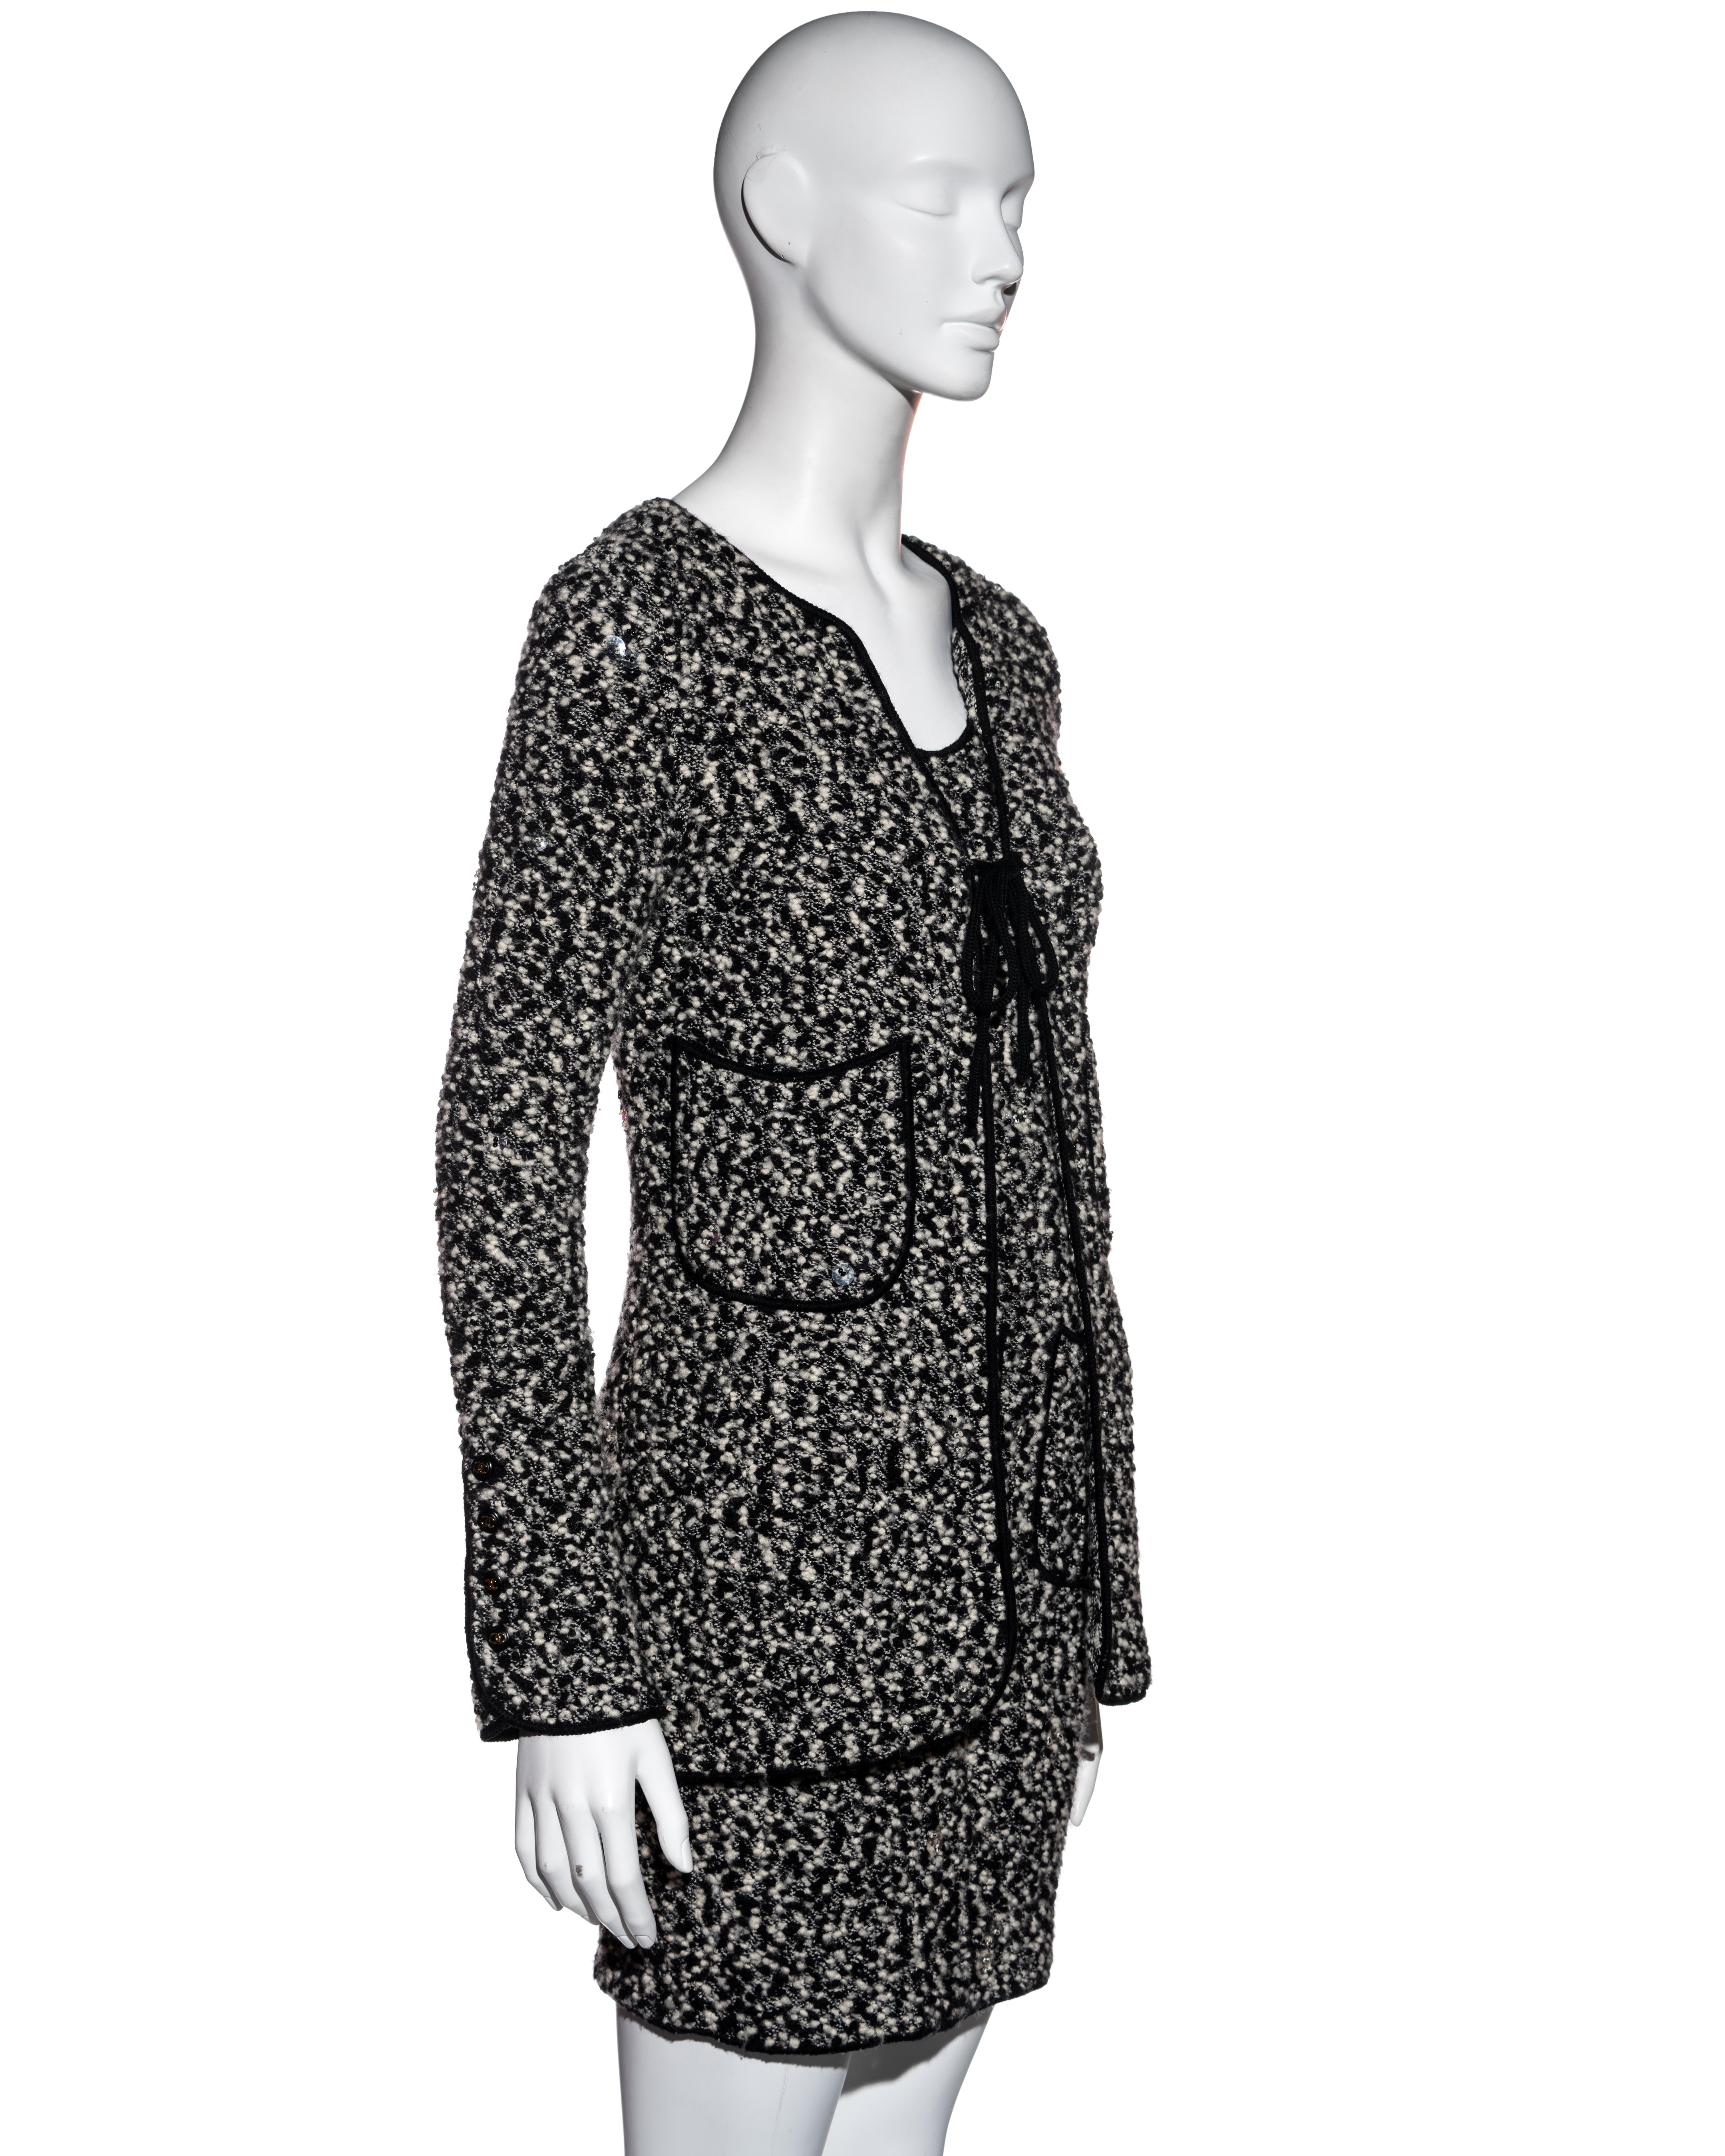 Chanel by Karl Lagerfeld bouclé wool mini dress and cardigan set, fw 1994 For Sale 4